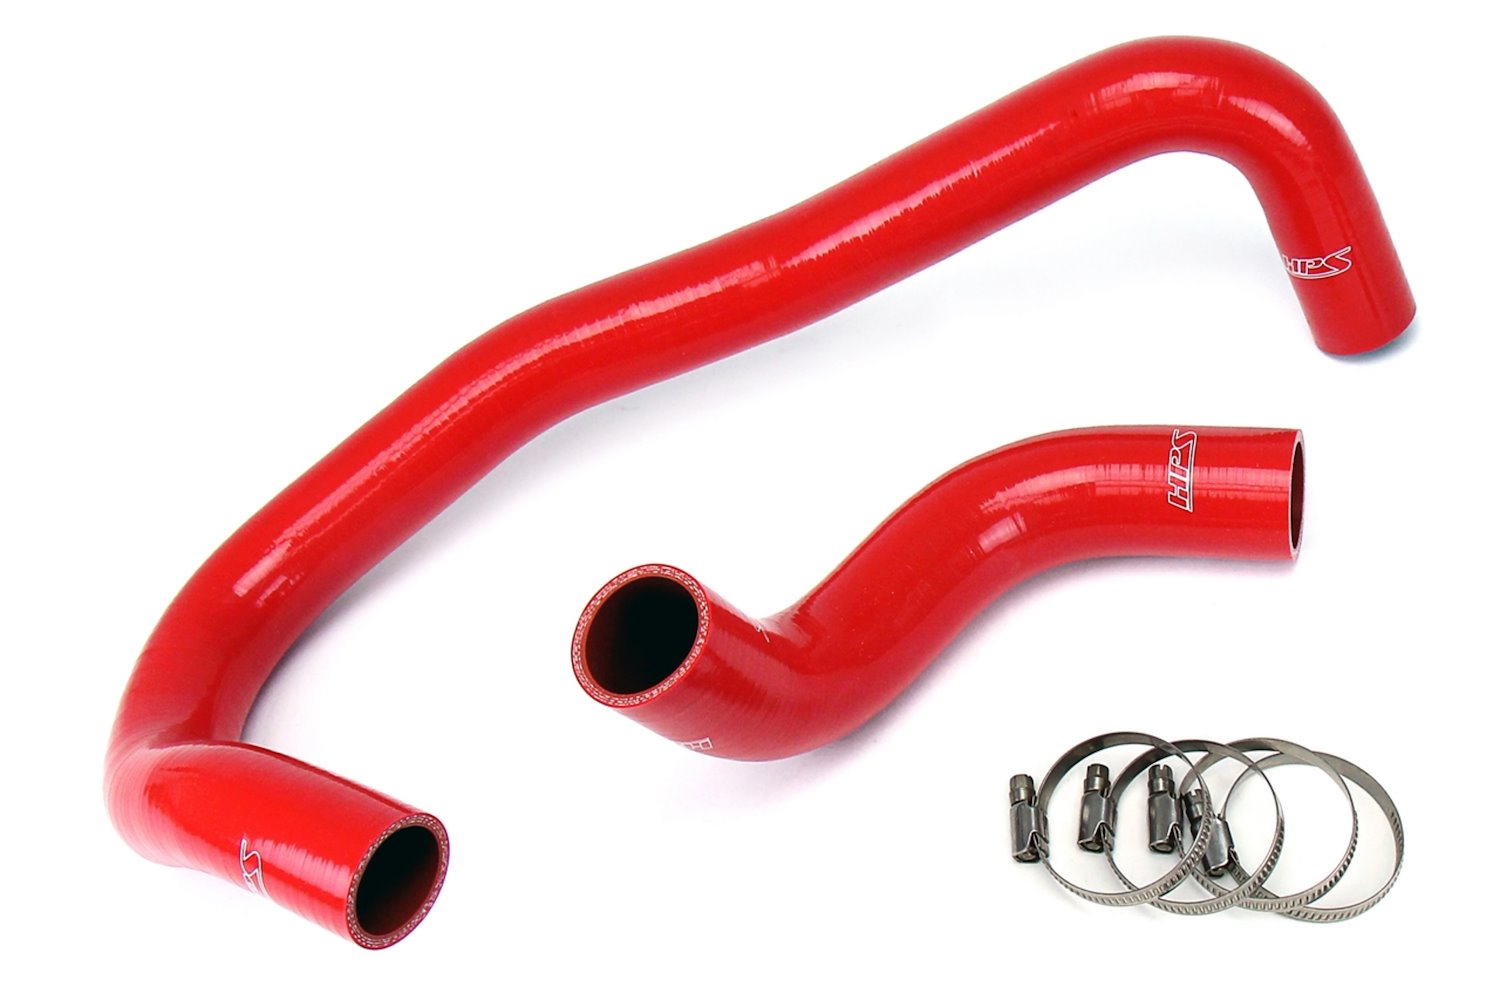 57-1327R-RED Radiator Hose Kit, High-Temp 3-Ply Reinforced Silicone, Replaces OEM Rubber Radiator Hoses